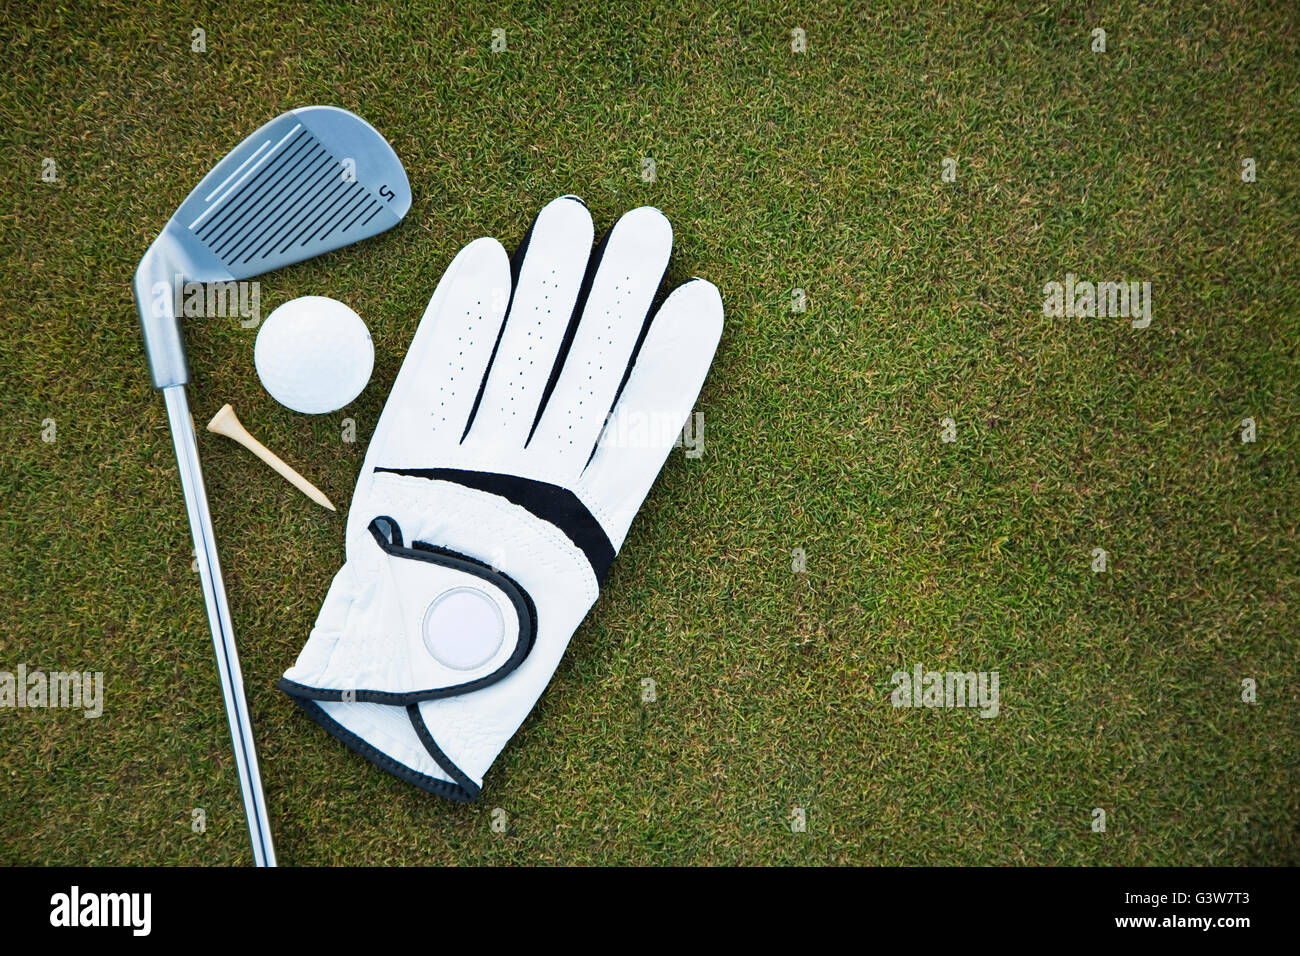 Golf glove, club, ball and tee on golf course Stock Photo